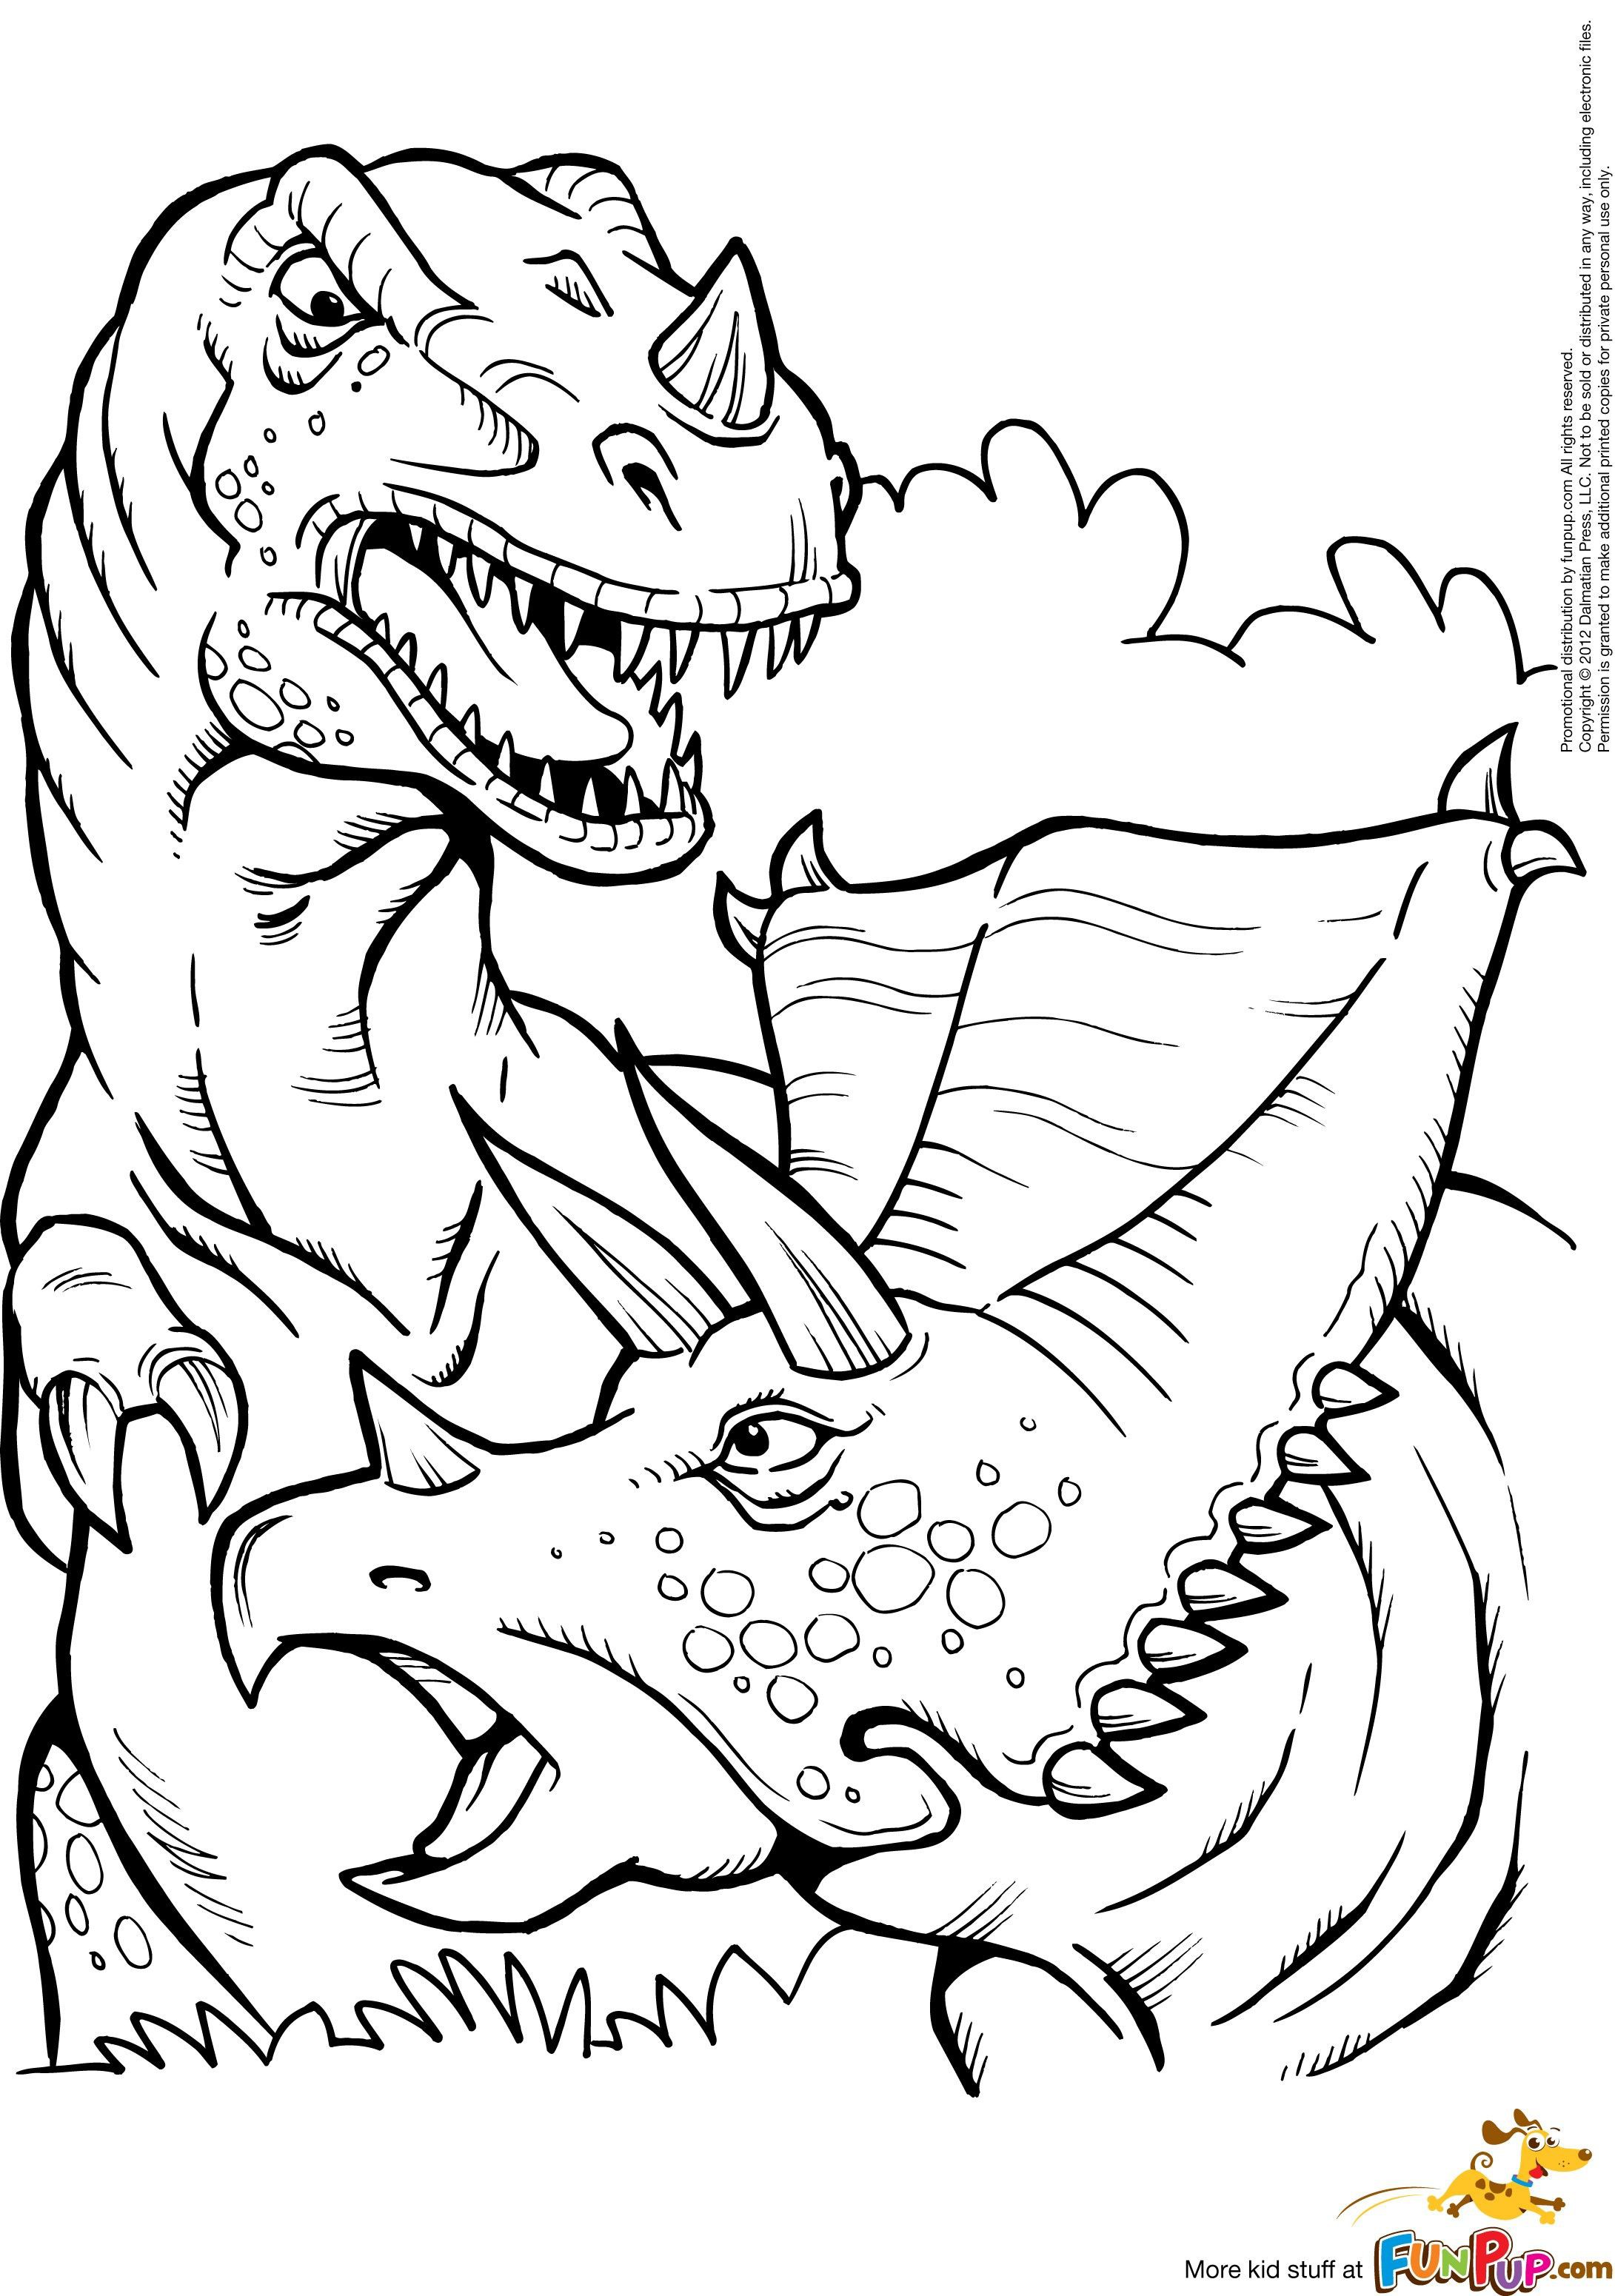 Dinosaurs Coloring Pages Simple Wallpaper